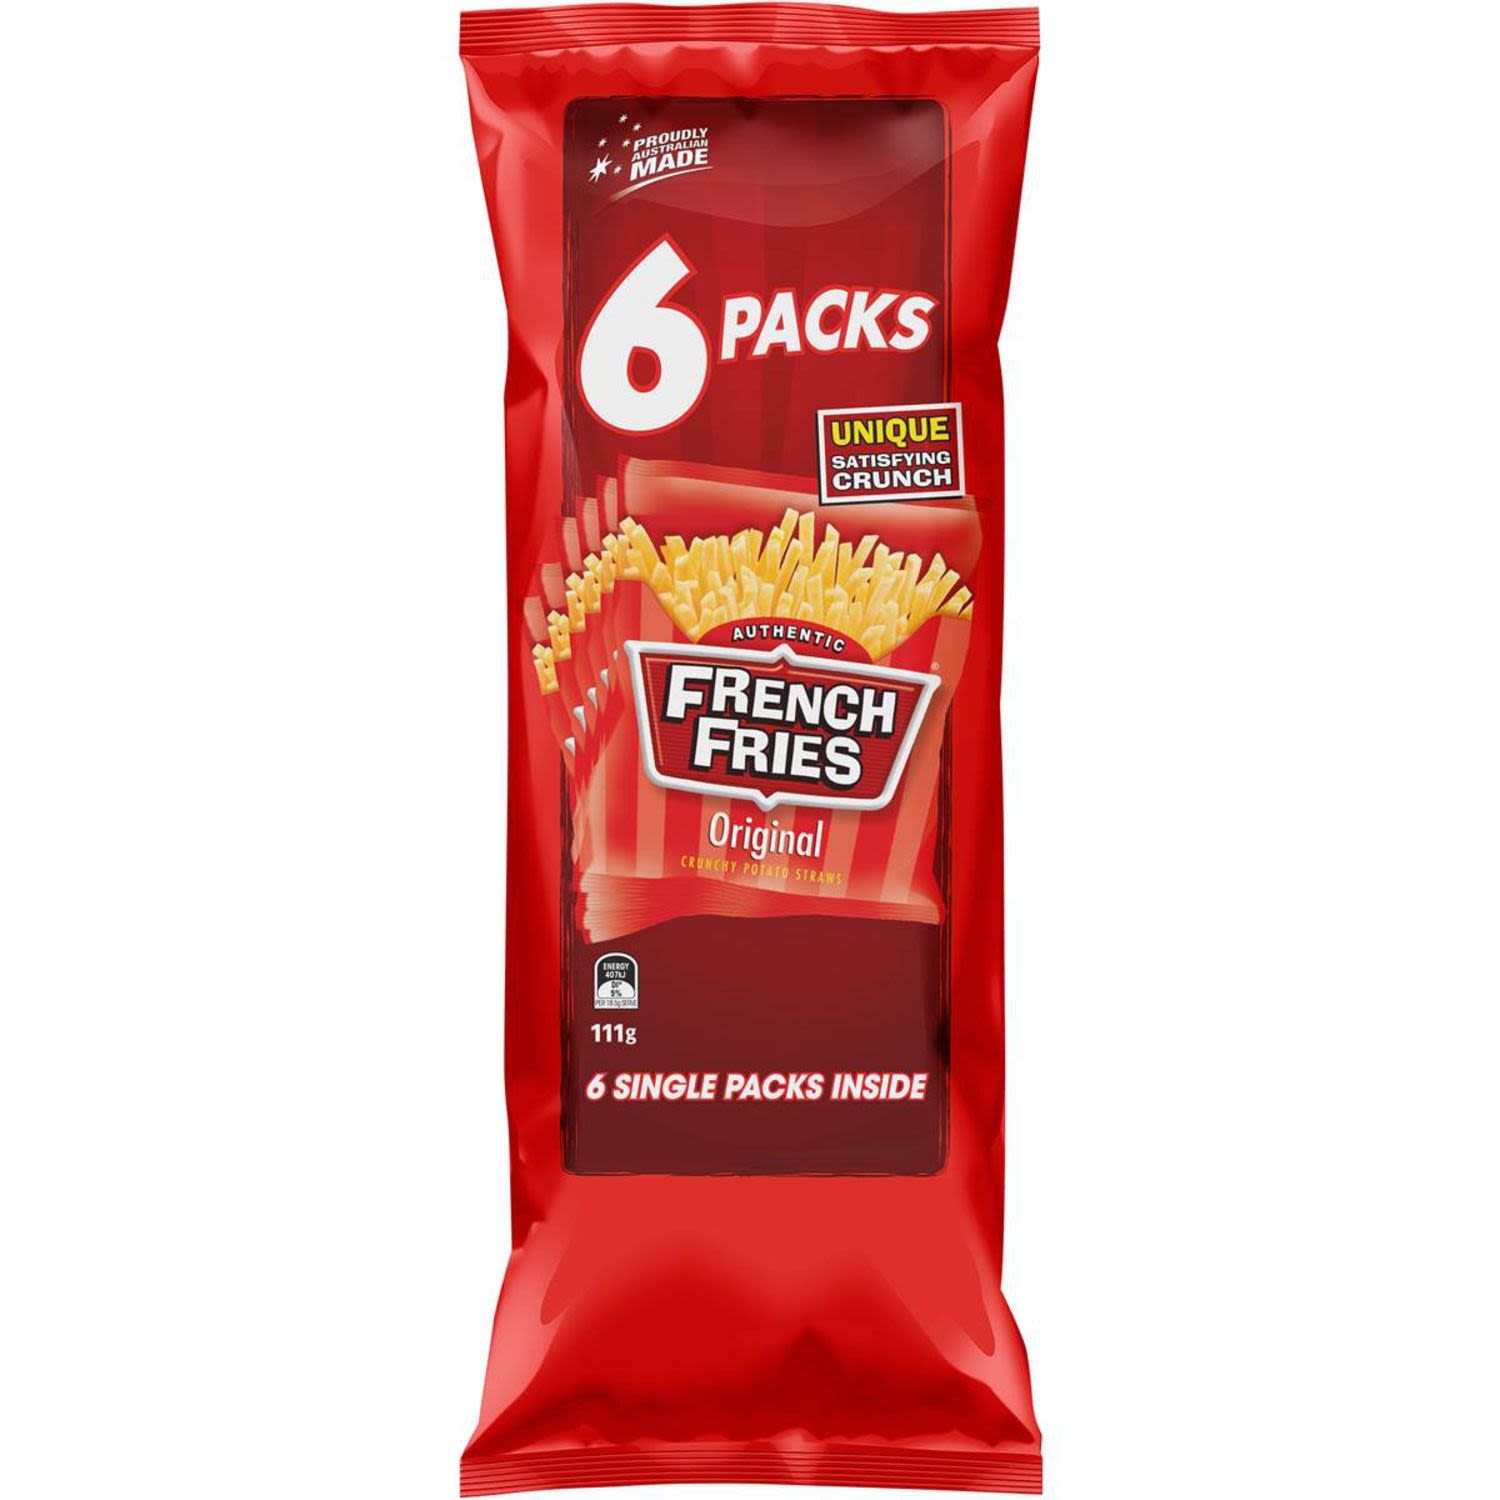 French Fries Multipack Original, 6 Each